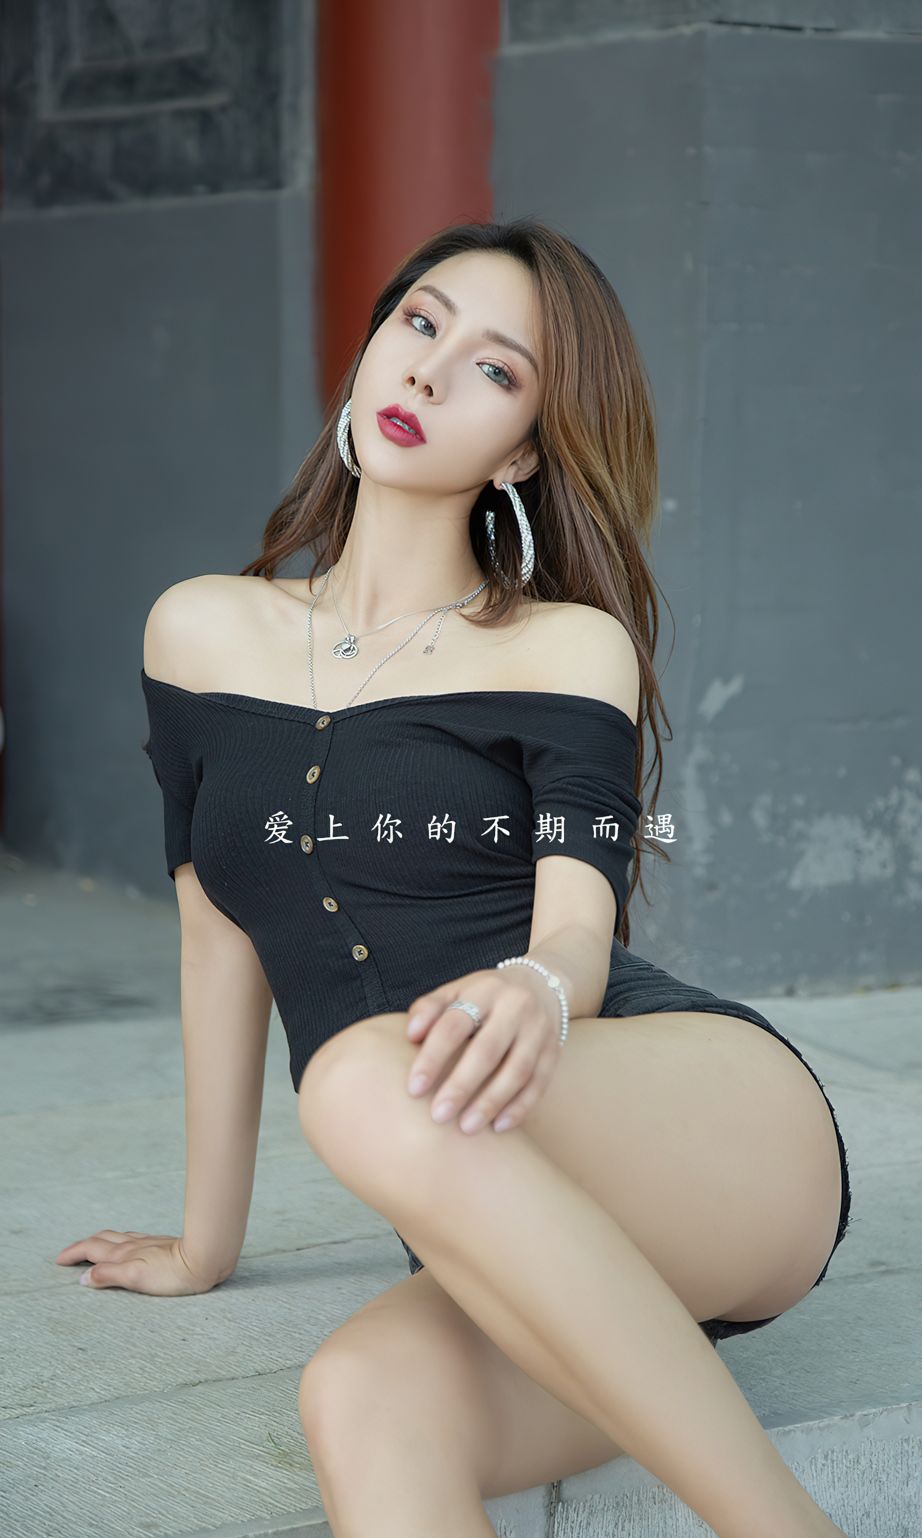 Juicy xiaoxiao 不期而遇